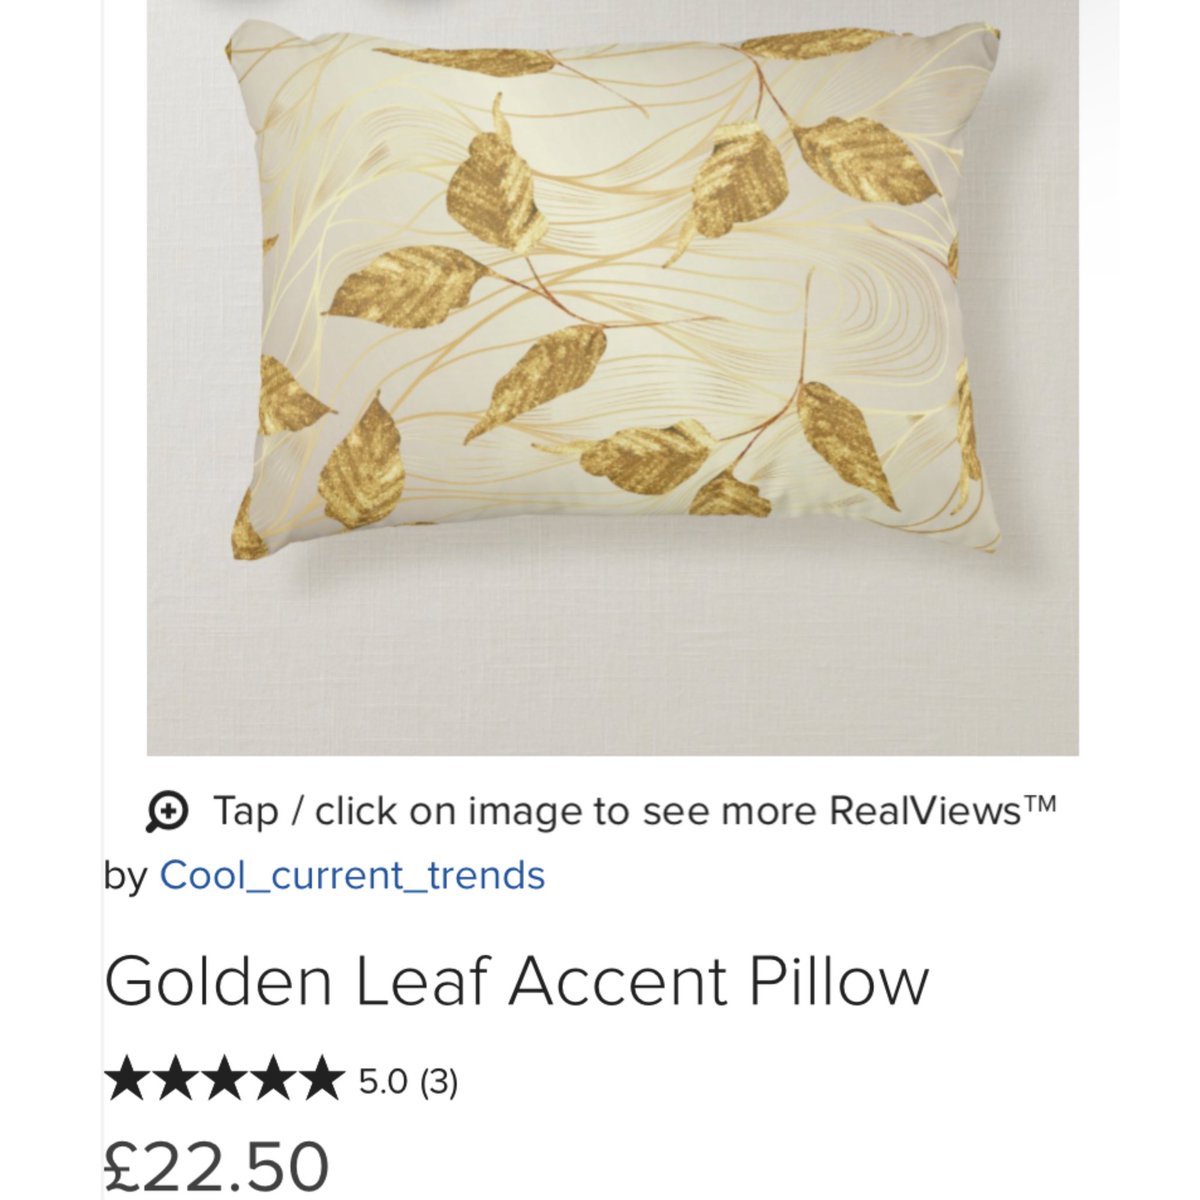 zazzle.co.uk/golden_leaf_ac… “Luxe Living Gold Leaf Pillow”. Add a touch of glamour to your sofa or bed with this exquisite pillow. #gold #Gold #goldpillow #pillow #pillows #sofa #couch #sofapillow #bed #decor #luxuriouspillows #designerpillows #floralpillow #goldenleaves #leaves